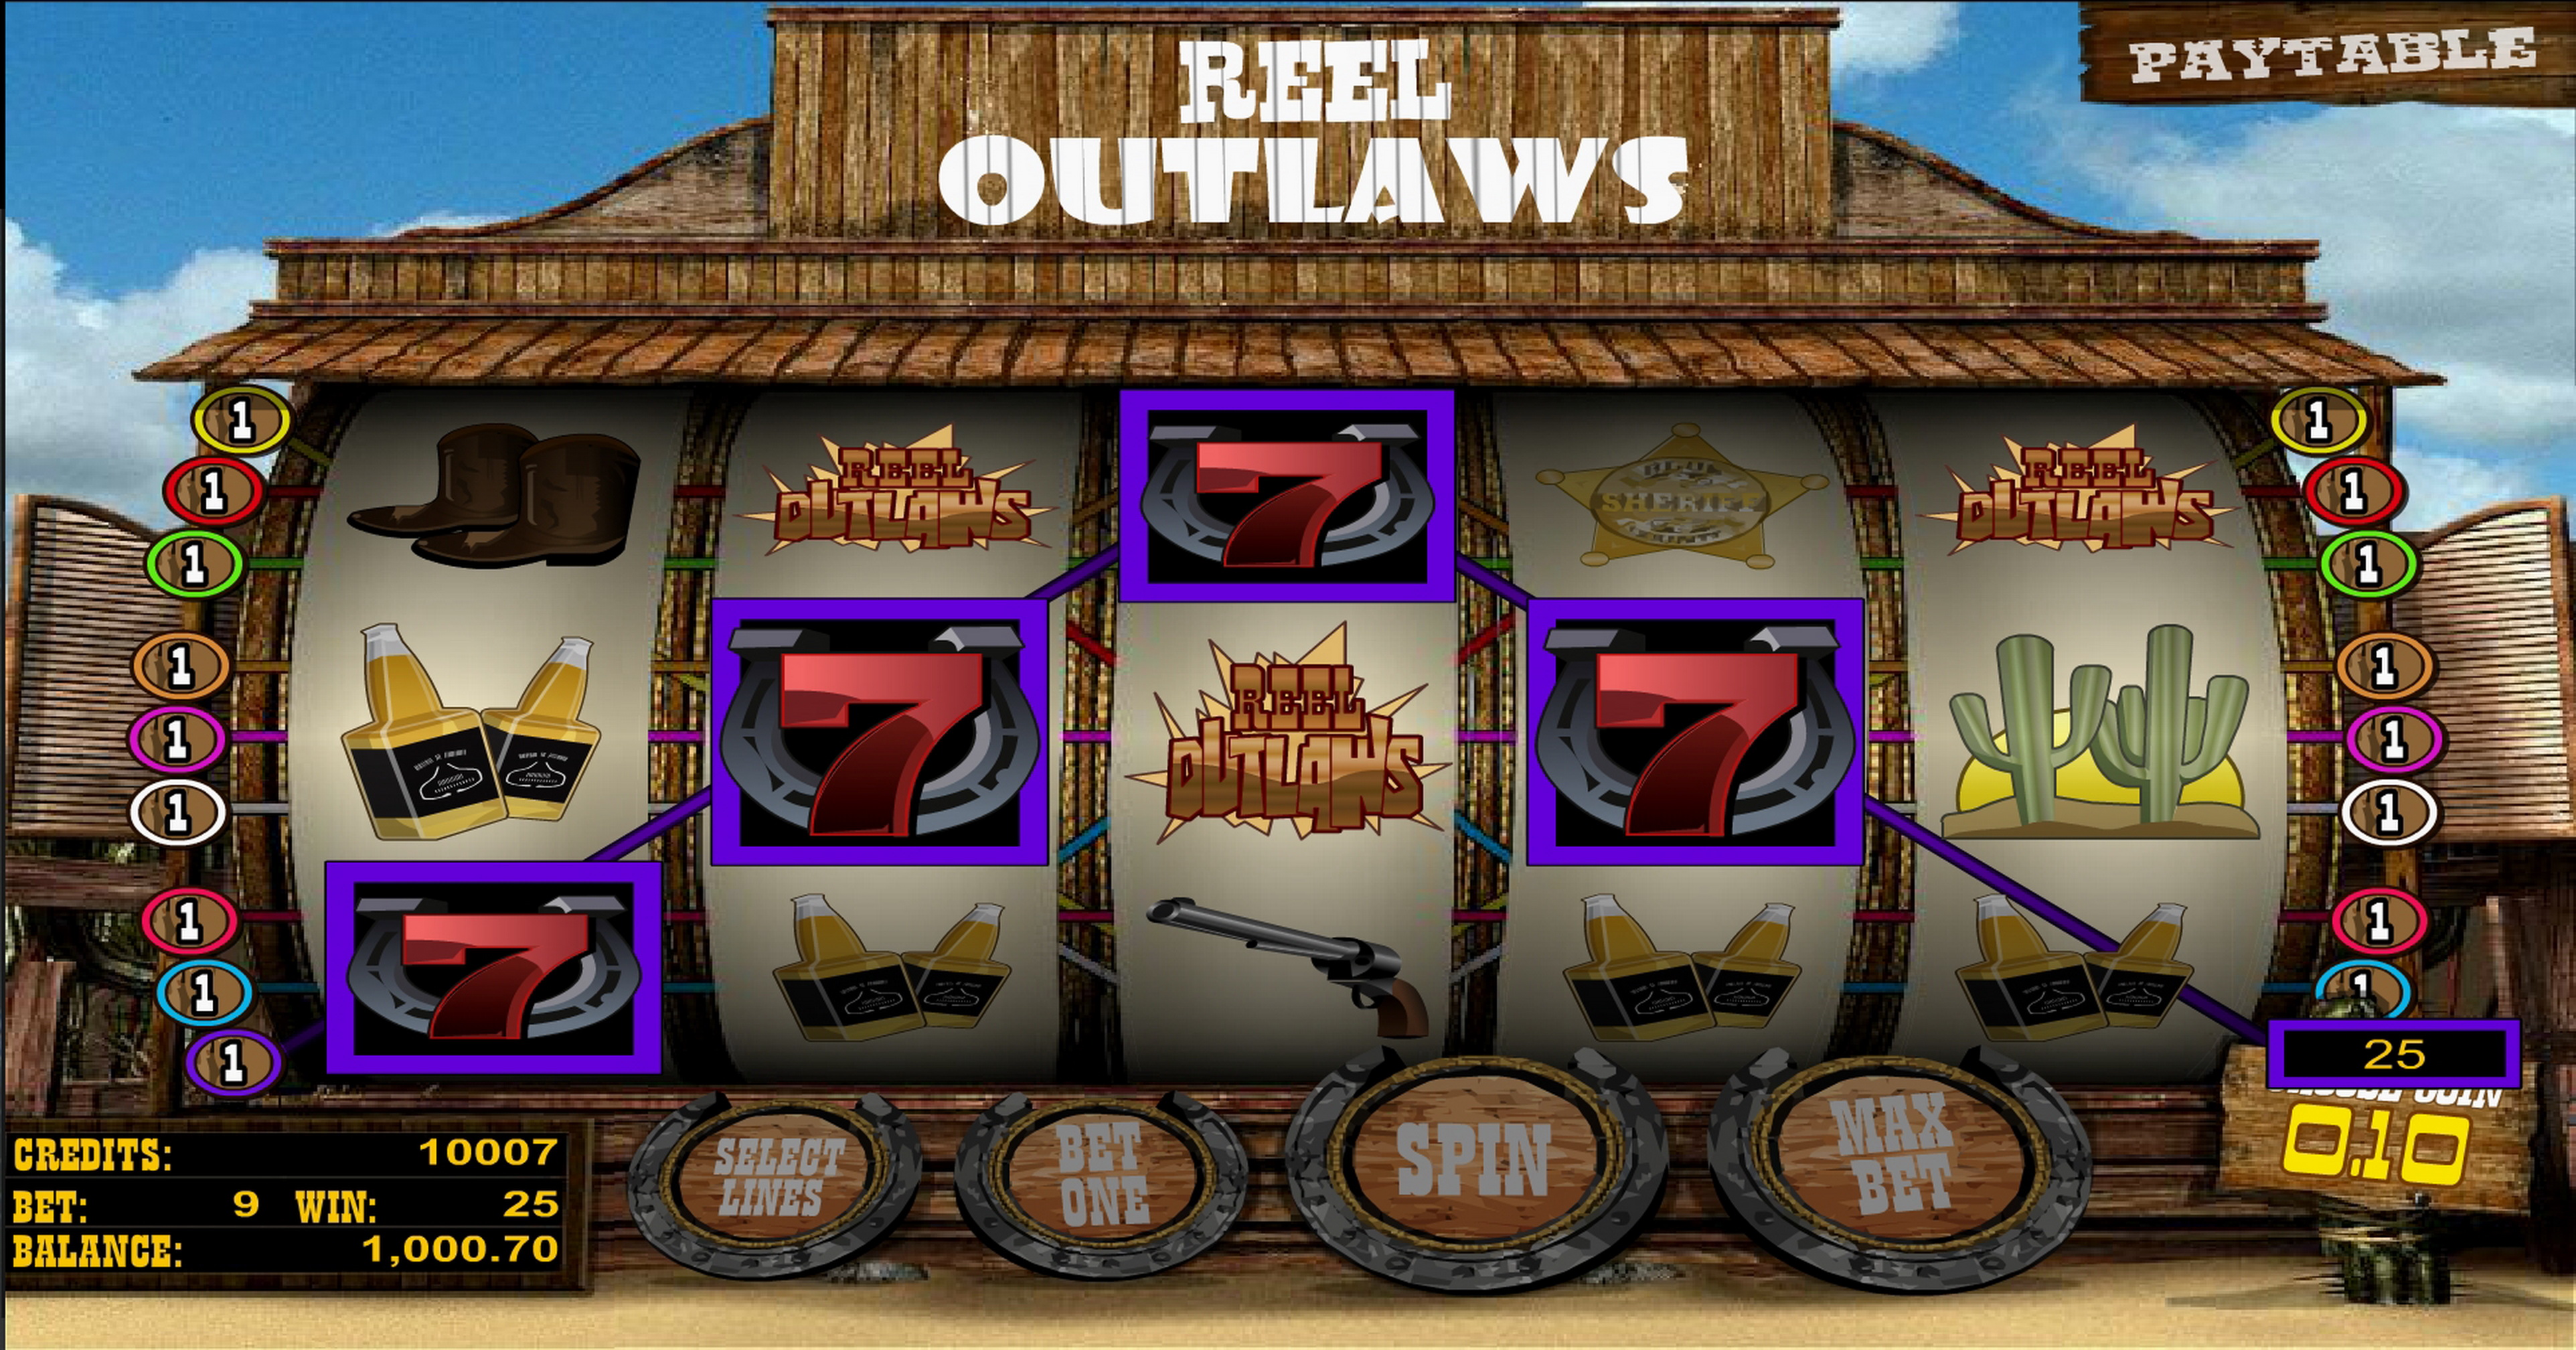 Win Money in Reel Outlaws Free Slot Game by Betsoft